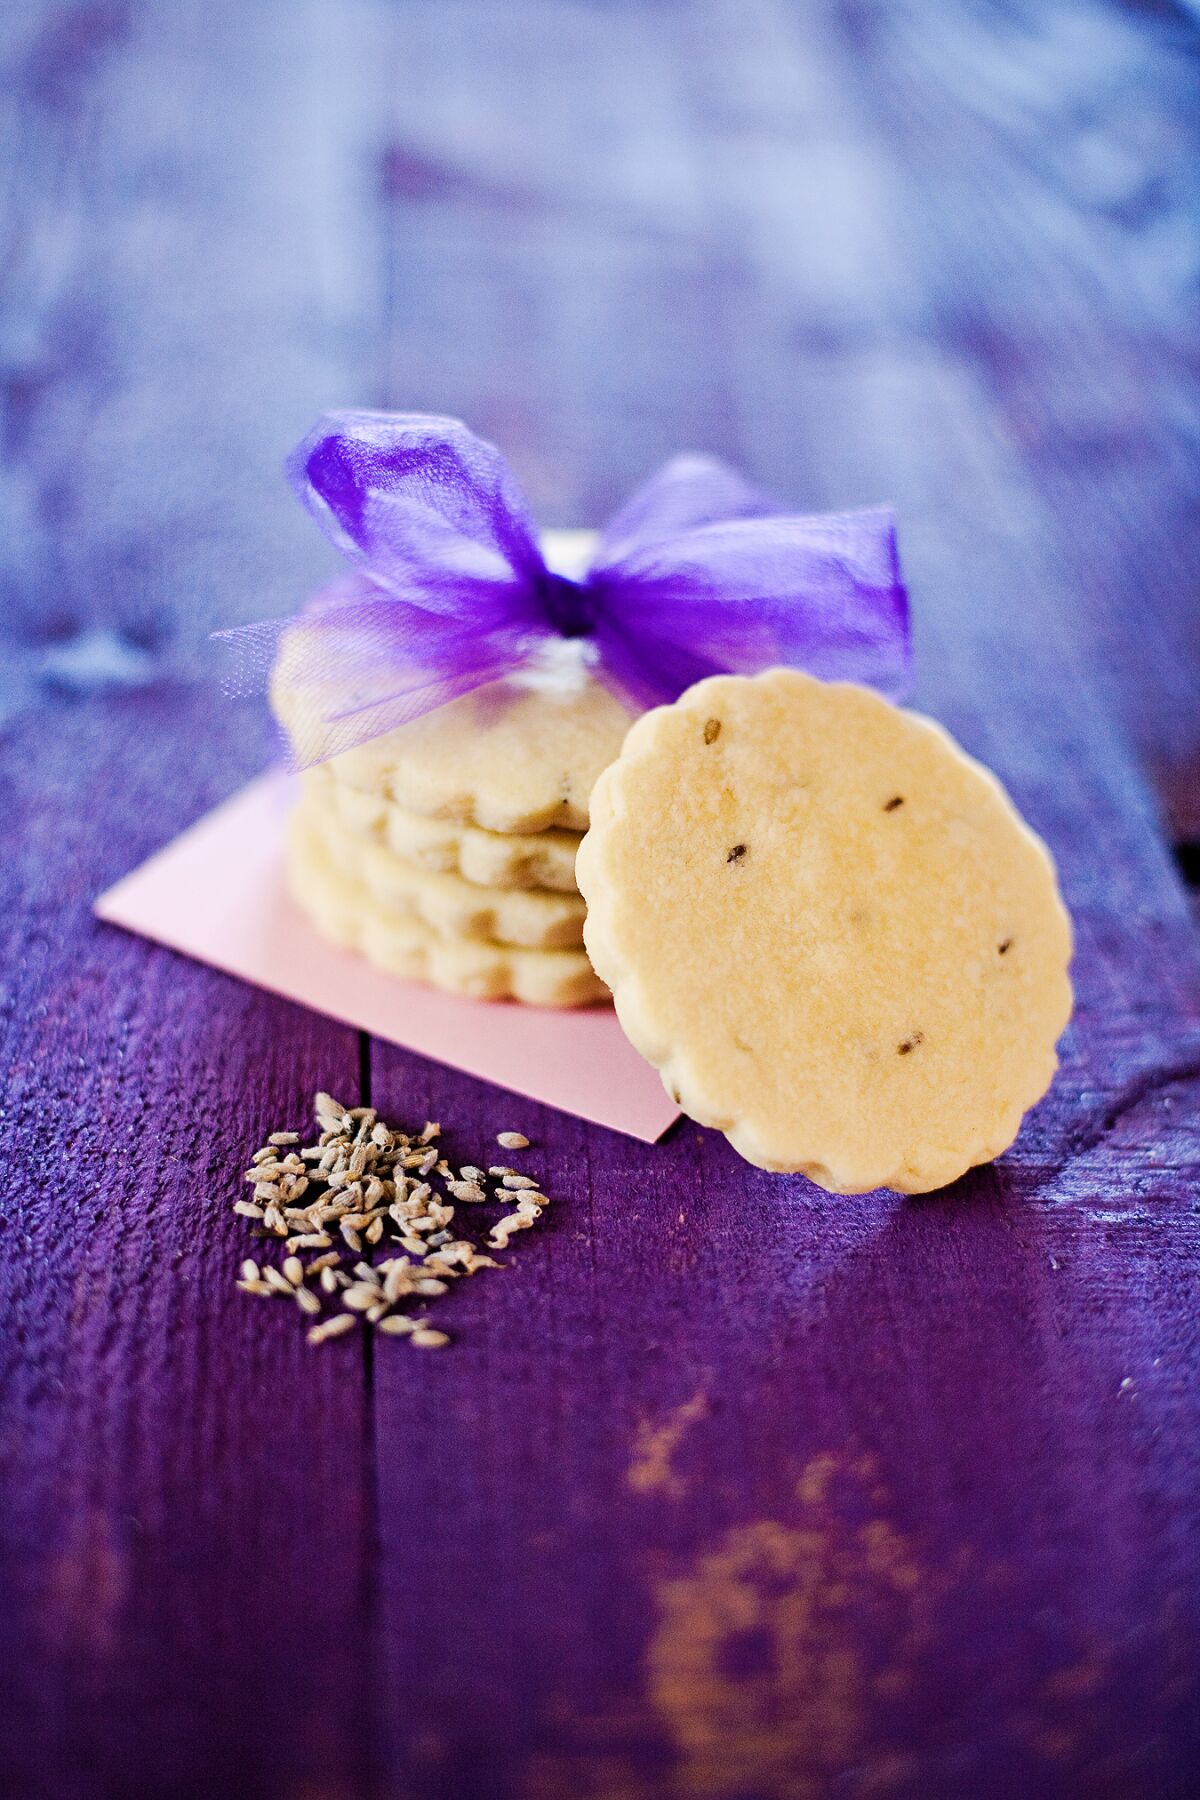 These lavender-scented shortbread cookies use the whole buds of a culinary variety of the plant.